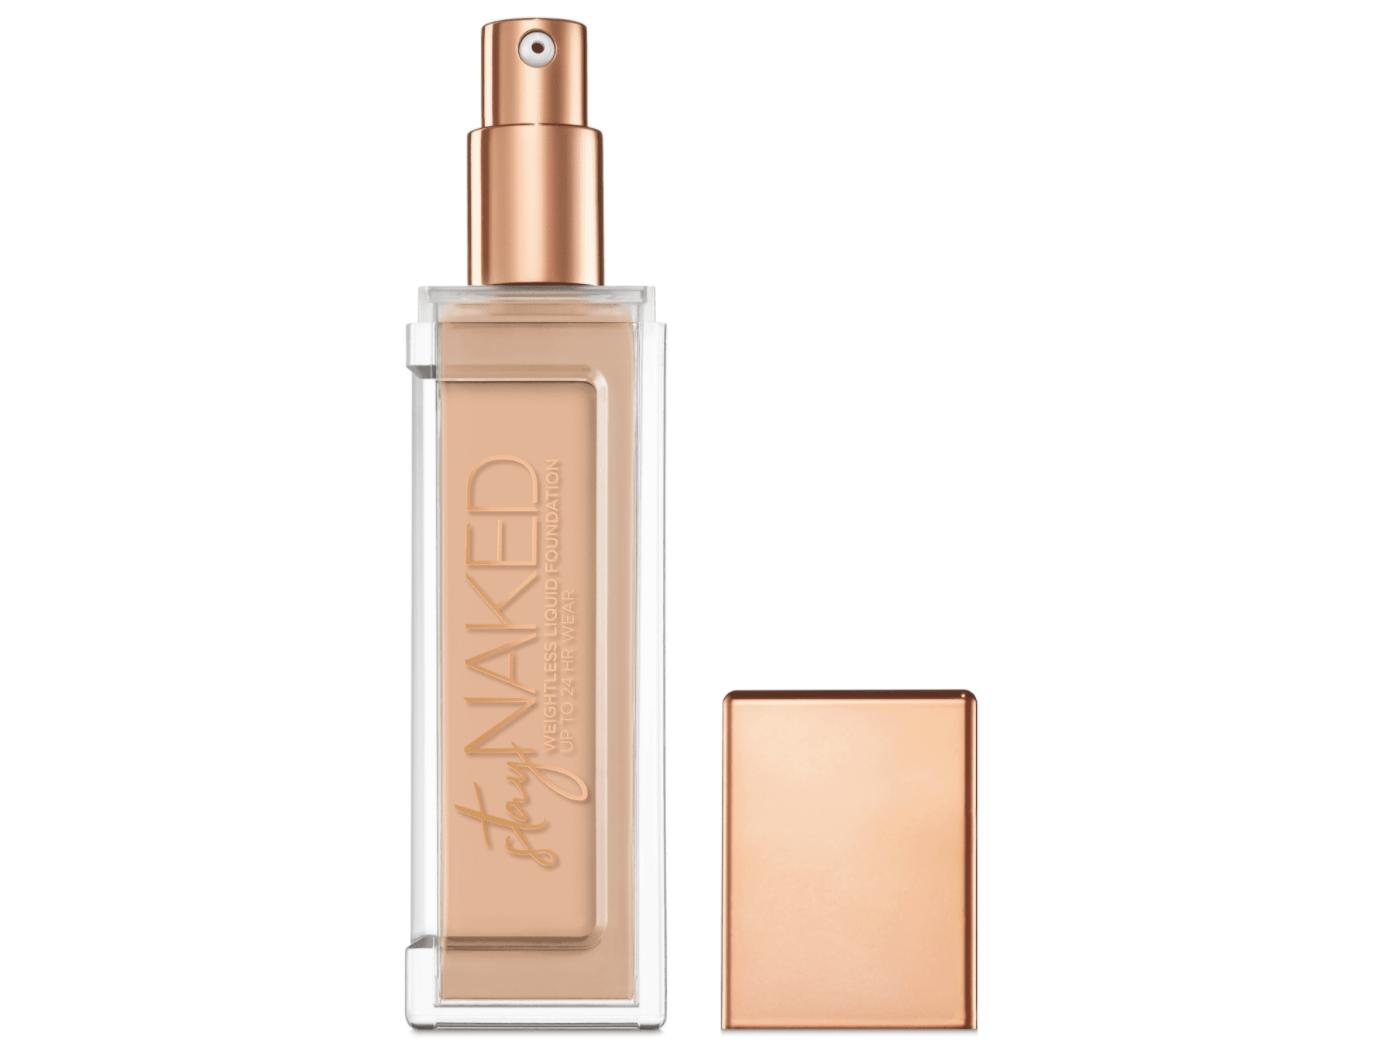 Urban Decay Stay Naked Weightless Liquid Foundation 20WY